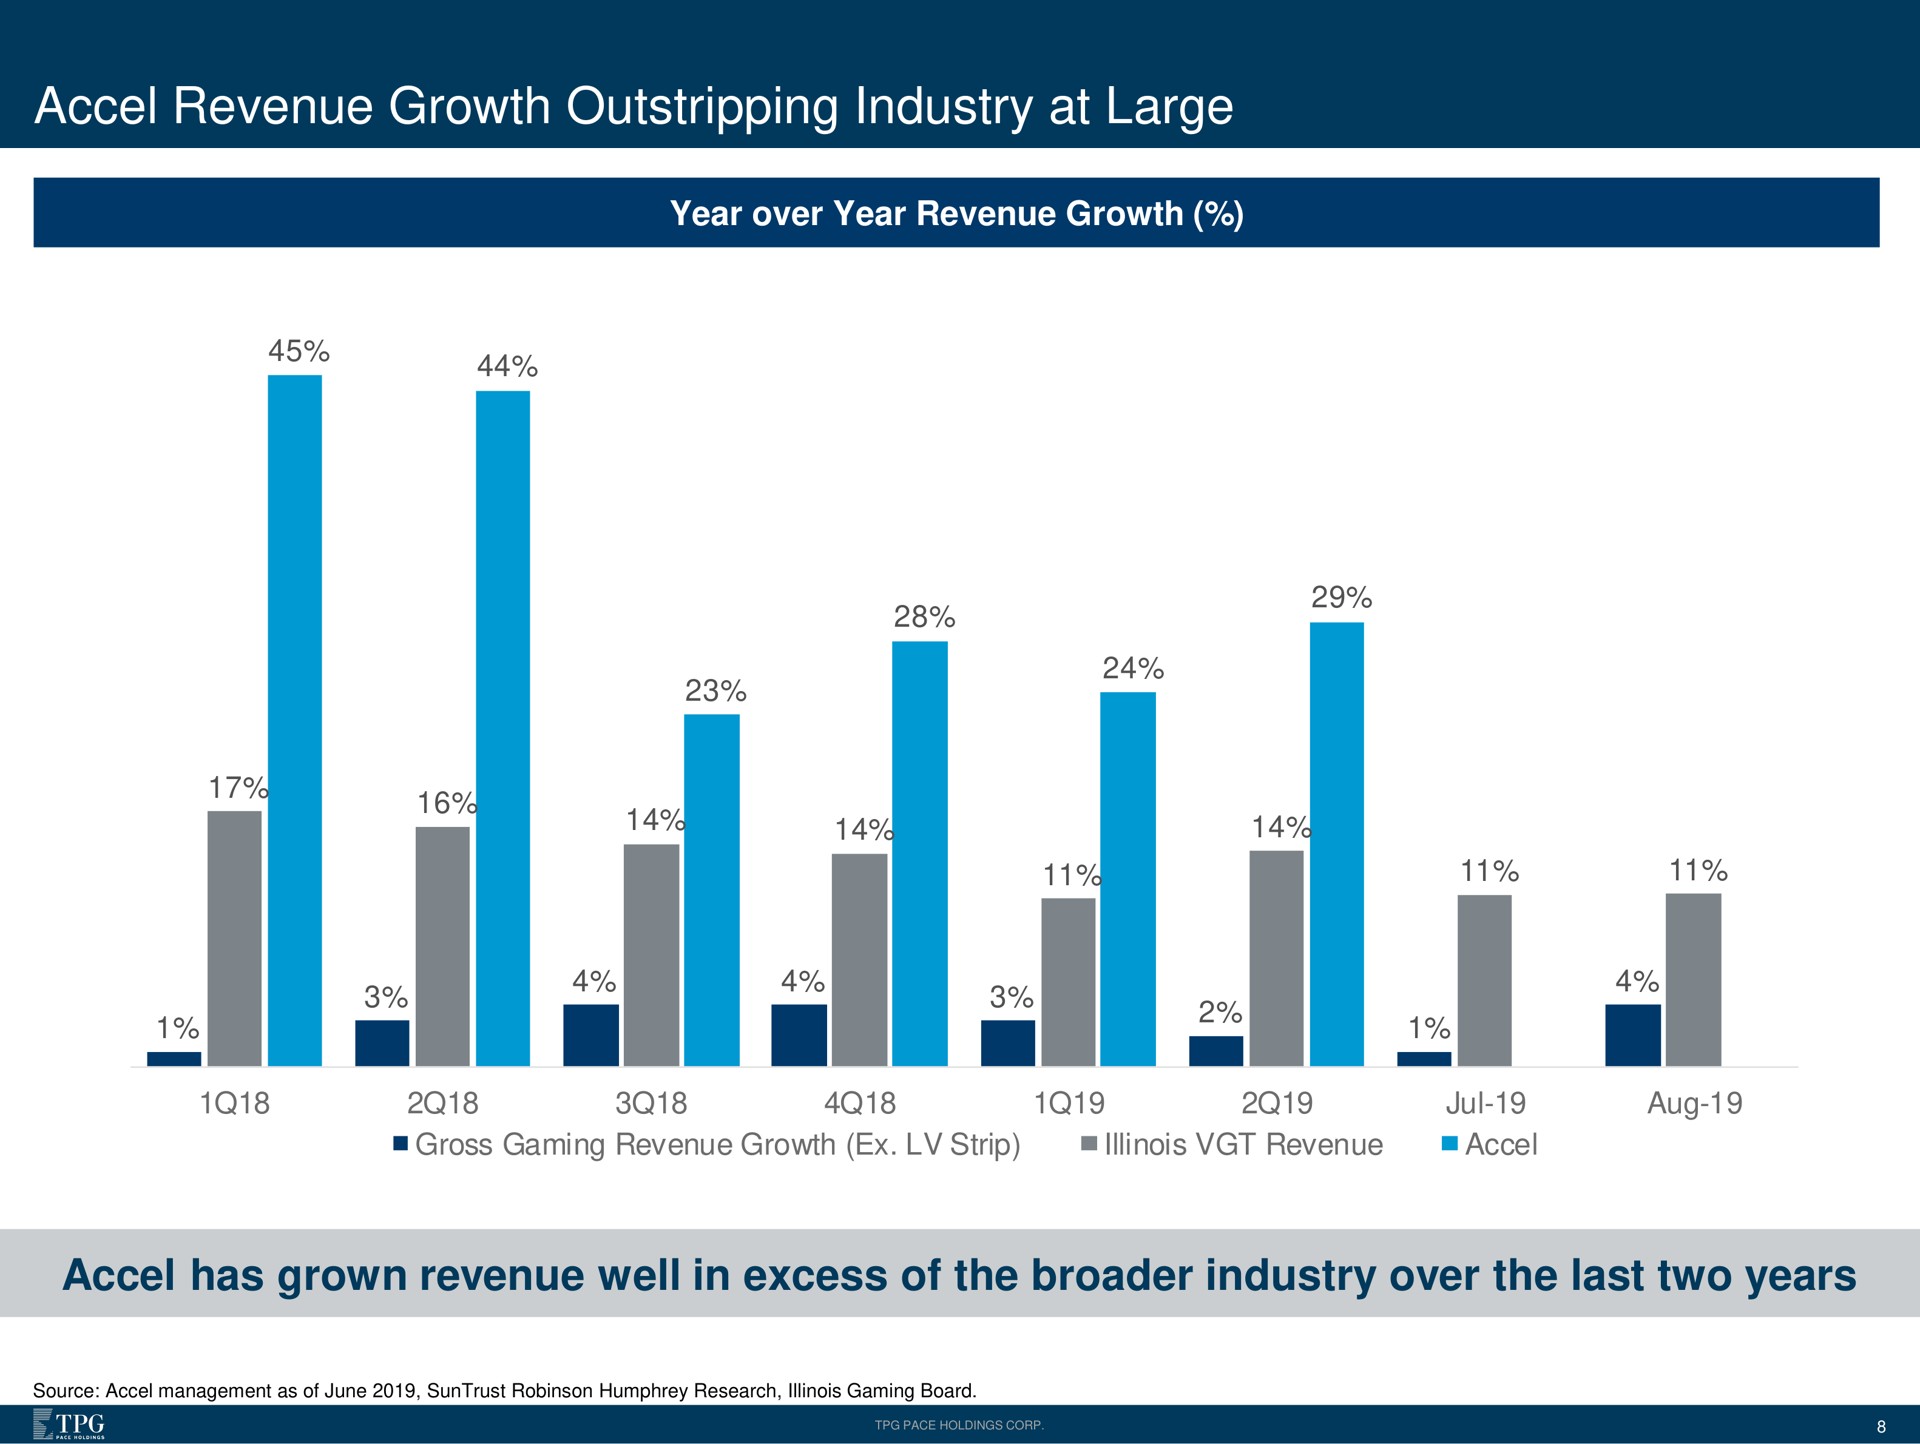 revenue growth outstripping industry at large has grown revenue well in excess of the industry over the last two years | Accel Entertaiment